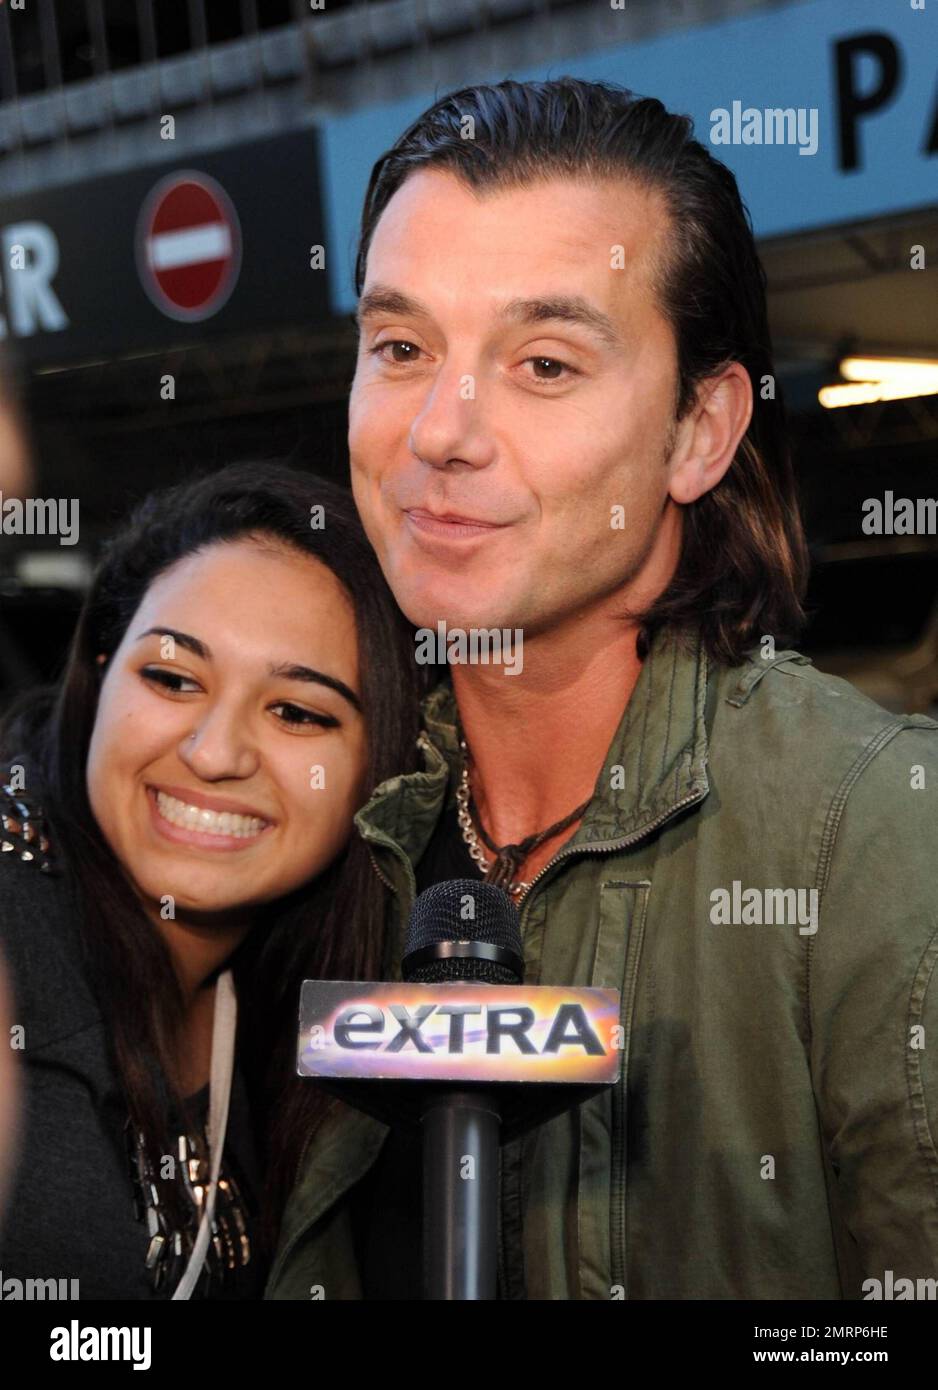 Gavin Rossdale poses with fans without his sunglasses as he arrives to CNN studios for the Larry King Live: Disaster in the Gulf Telethon hosted by American Idol's Ryan Seacret.  Celebrities took calls throughout the two-hour show to help the people, animals and wildlife affected by the continuing oil leak in the Gulf of Mexico.  The event reportedly raised $1.7 million with donations going to the United Way, National Wildlife Federation or The Nature Conservancy.  The British Petroleum-leased oil well off the coast of Louisiana, which busted on April 20, has yet to be fully contained. Los Ang Stock Photo